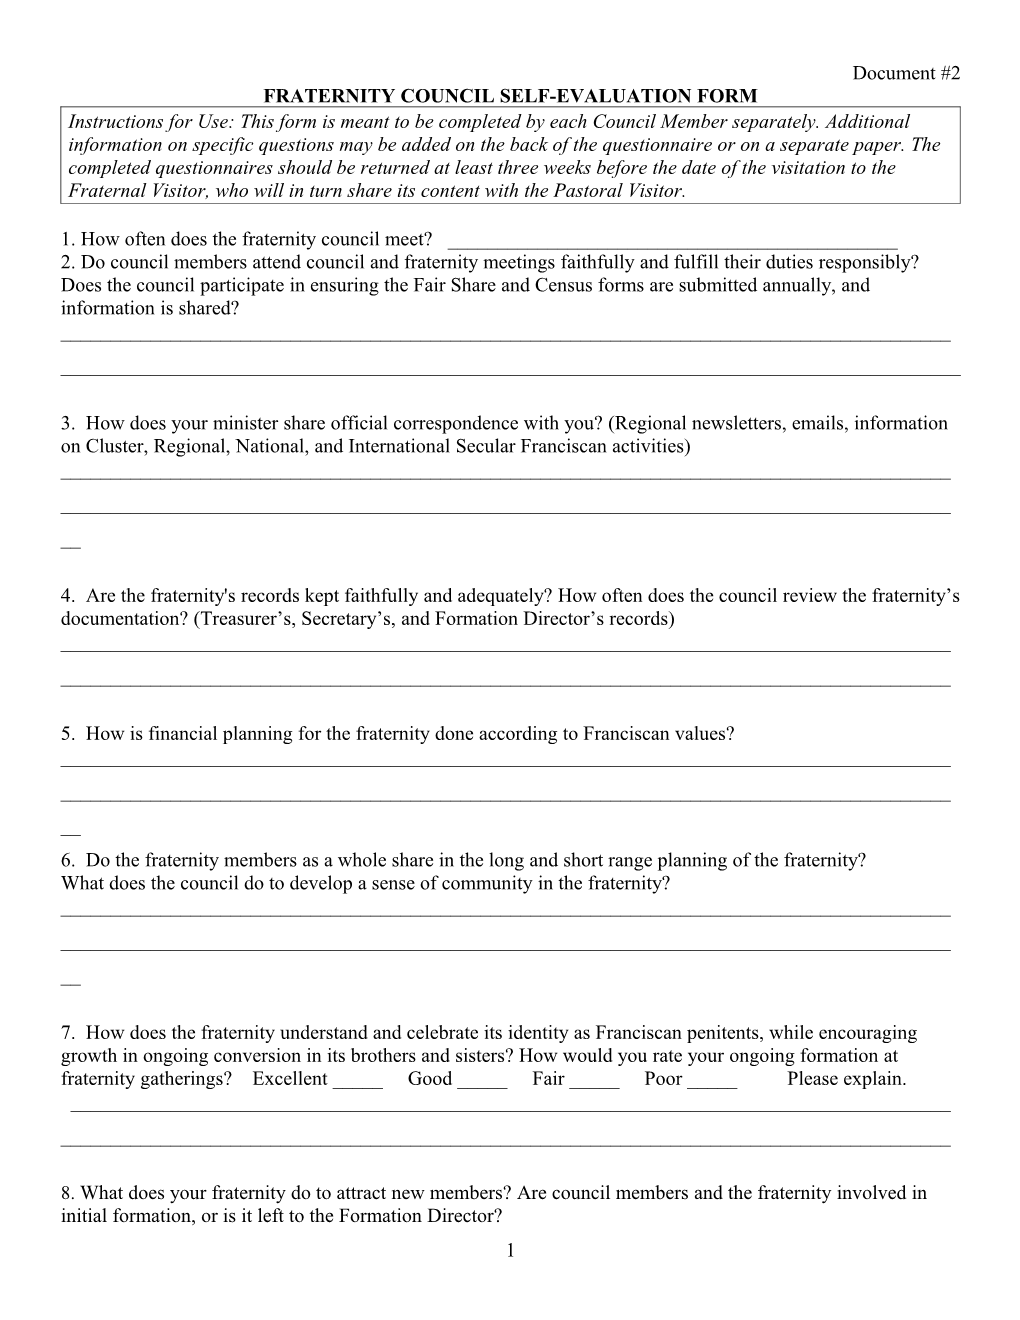 Fraternity Council Self-Evaluation Form